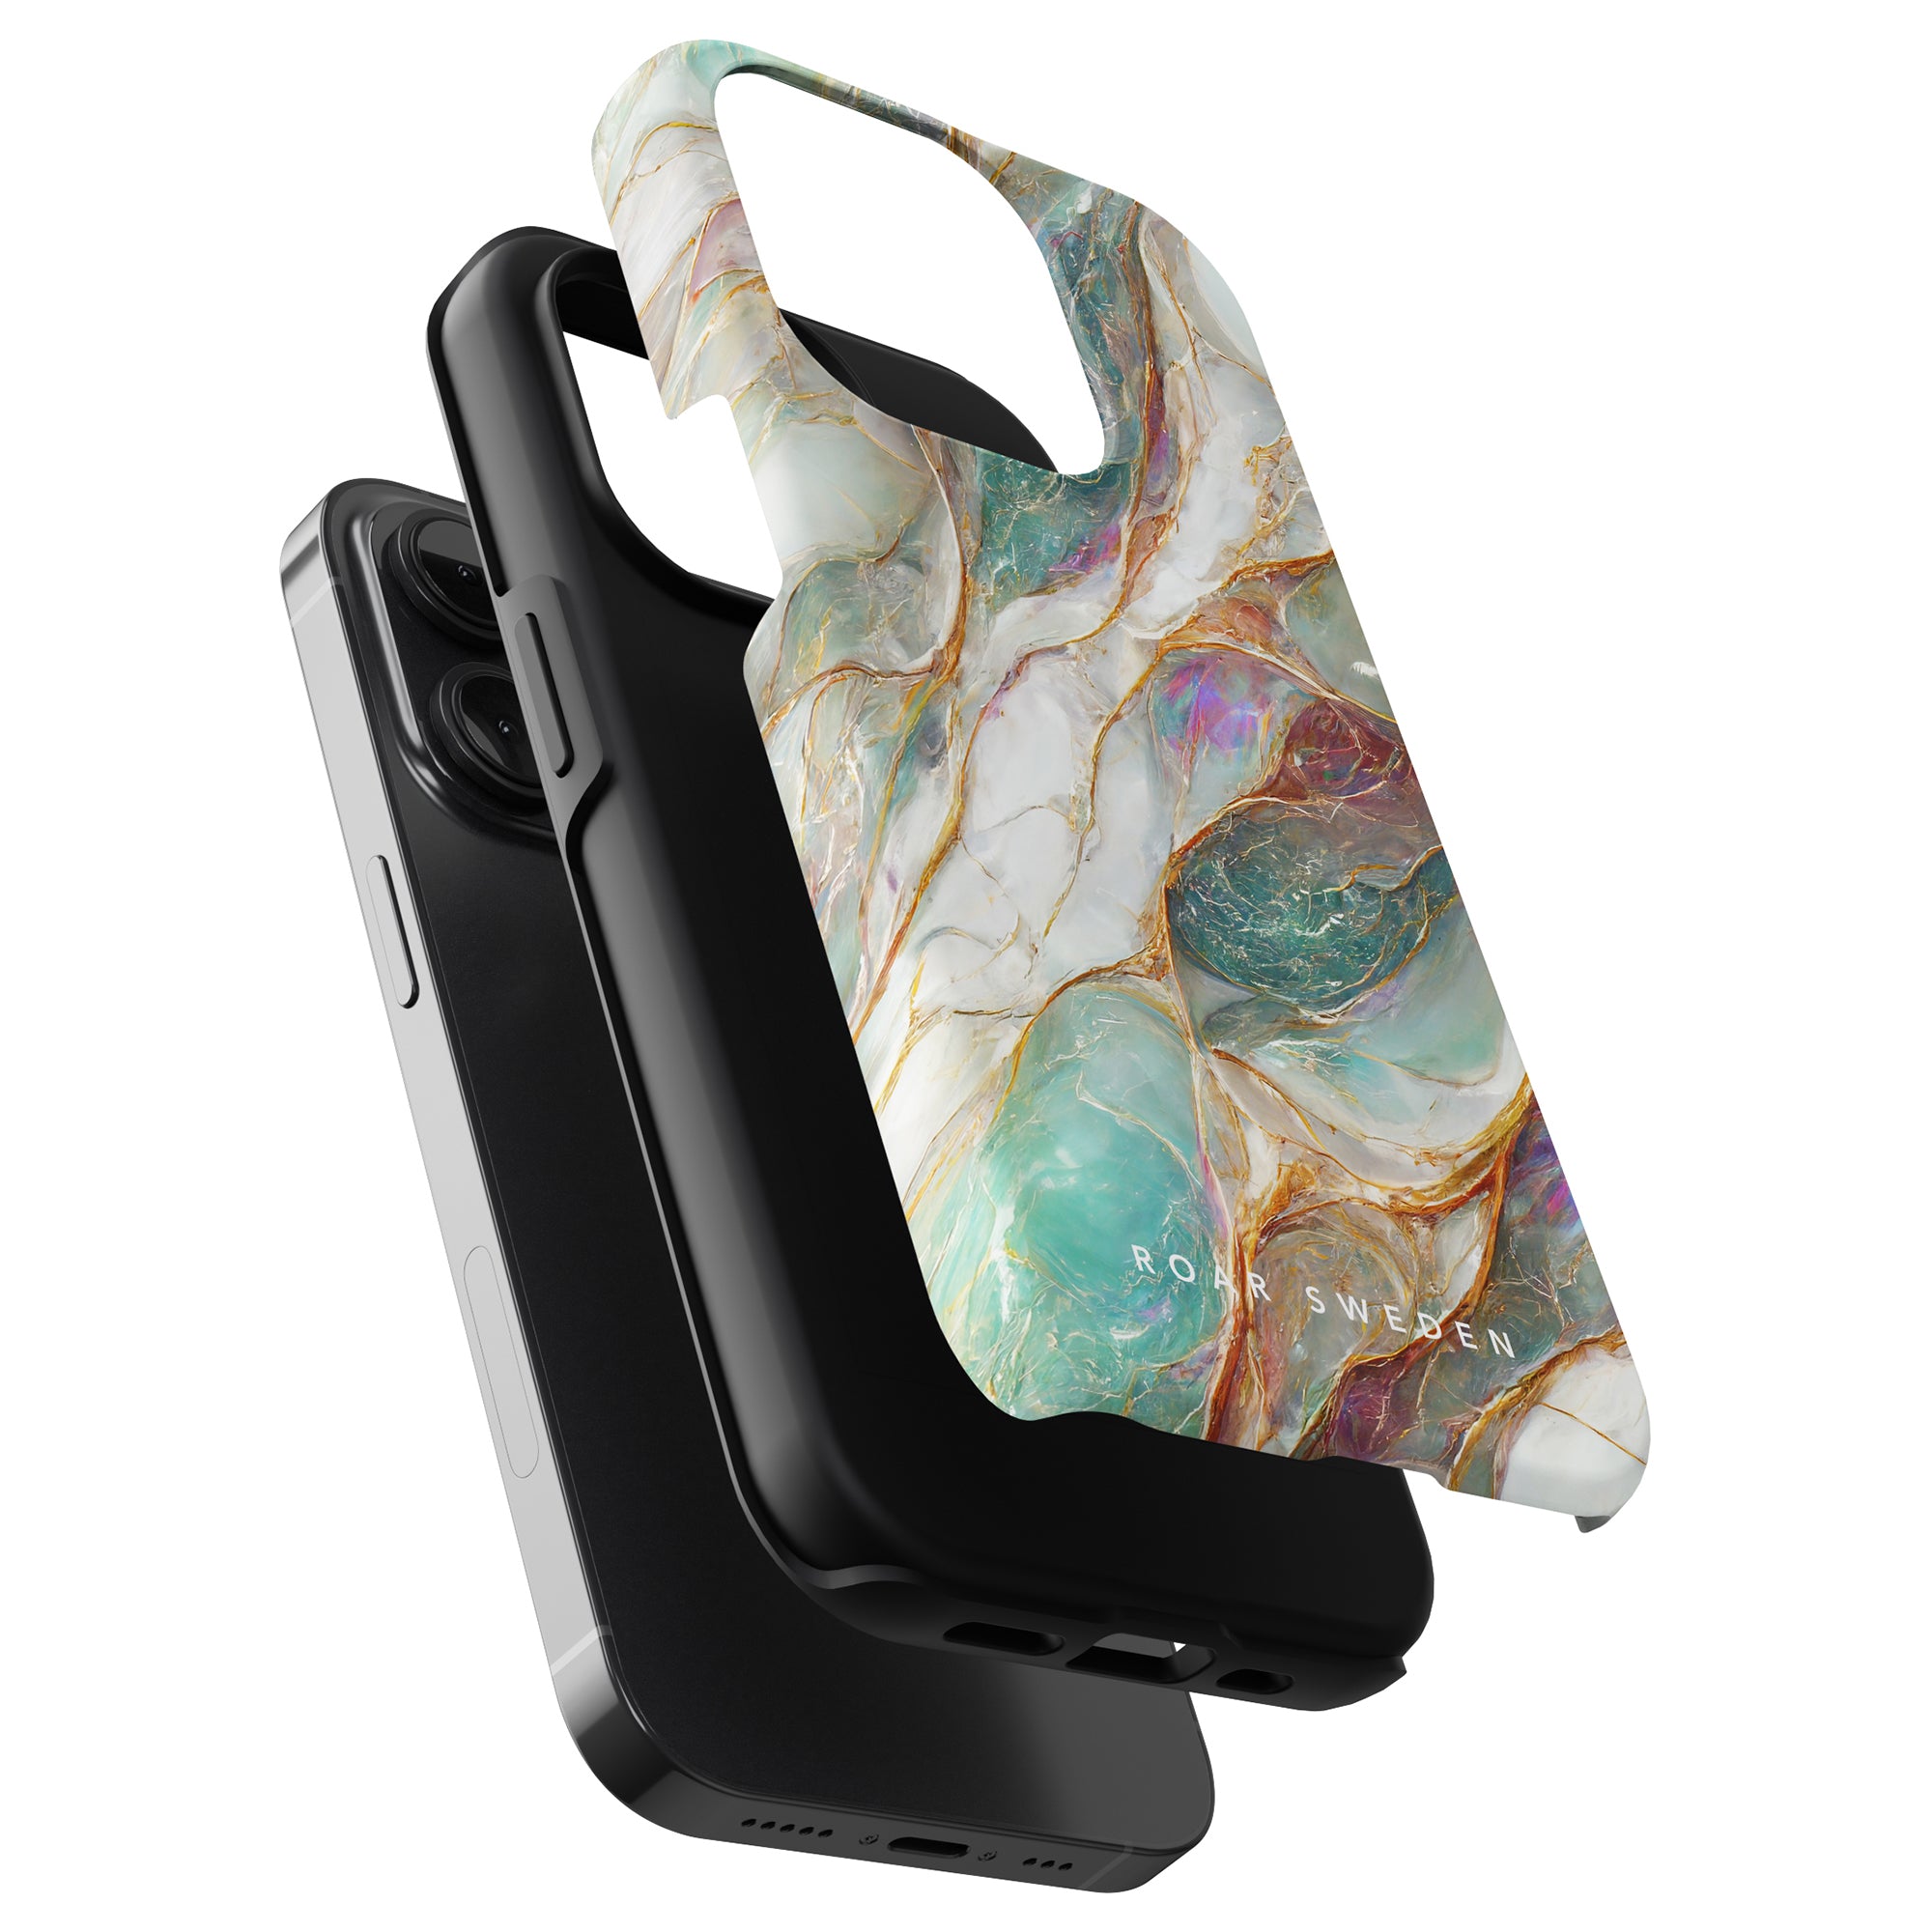 Two smartphone cases, one black and one with a Mother of Pearl - Tough Case design, displayed side by side.